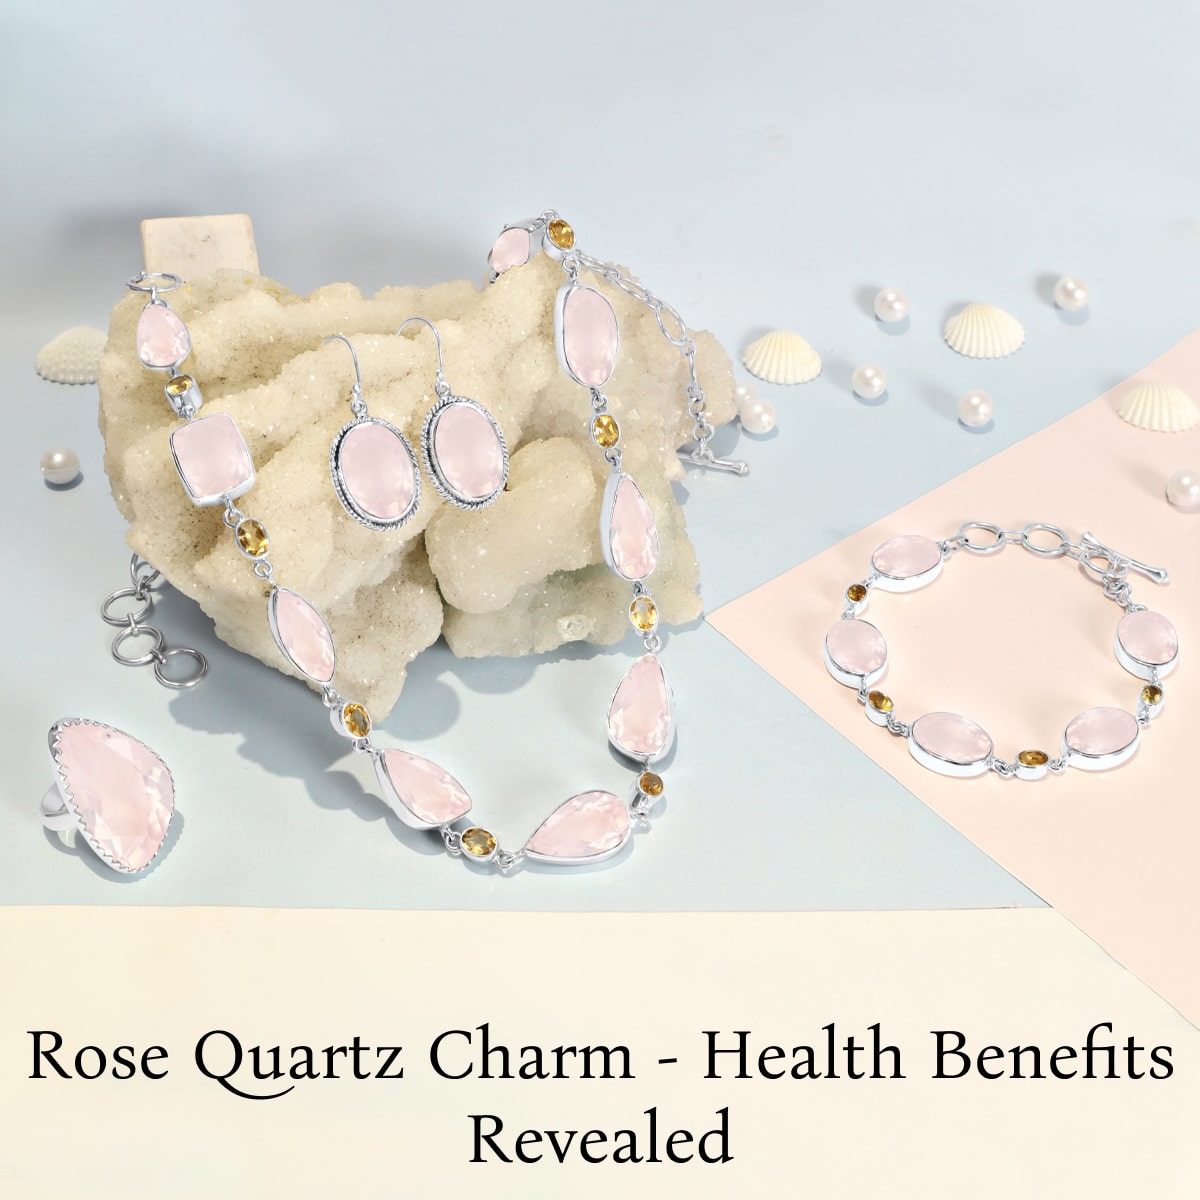 Rose Quartz Meanings and Uses - The Complete Guide